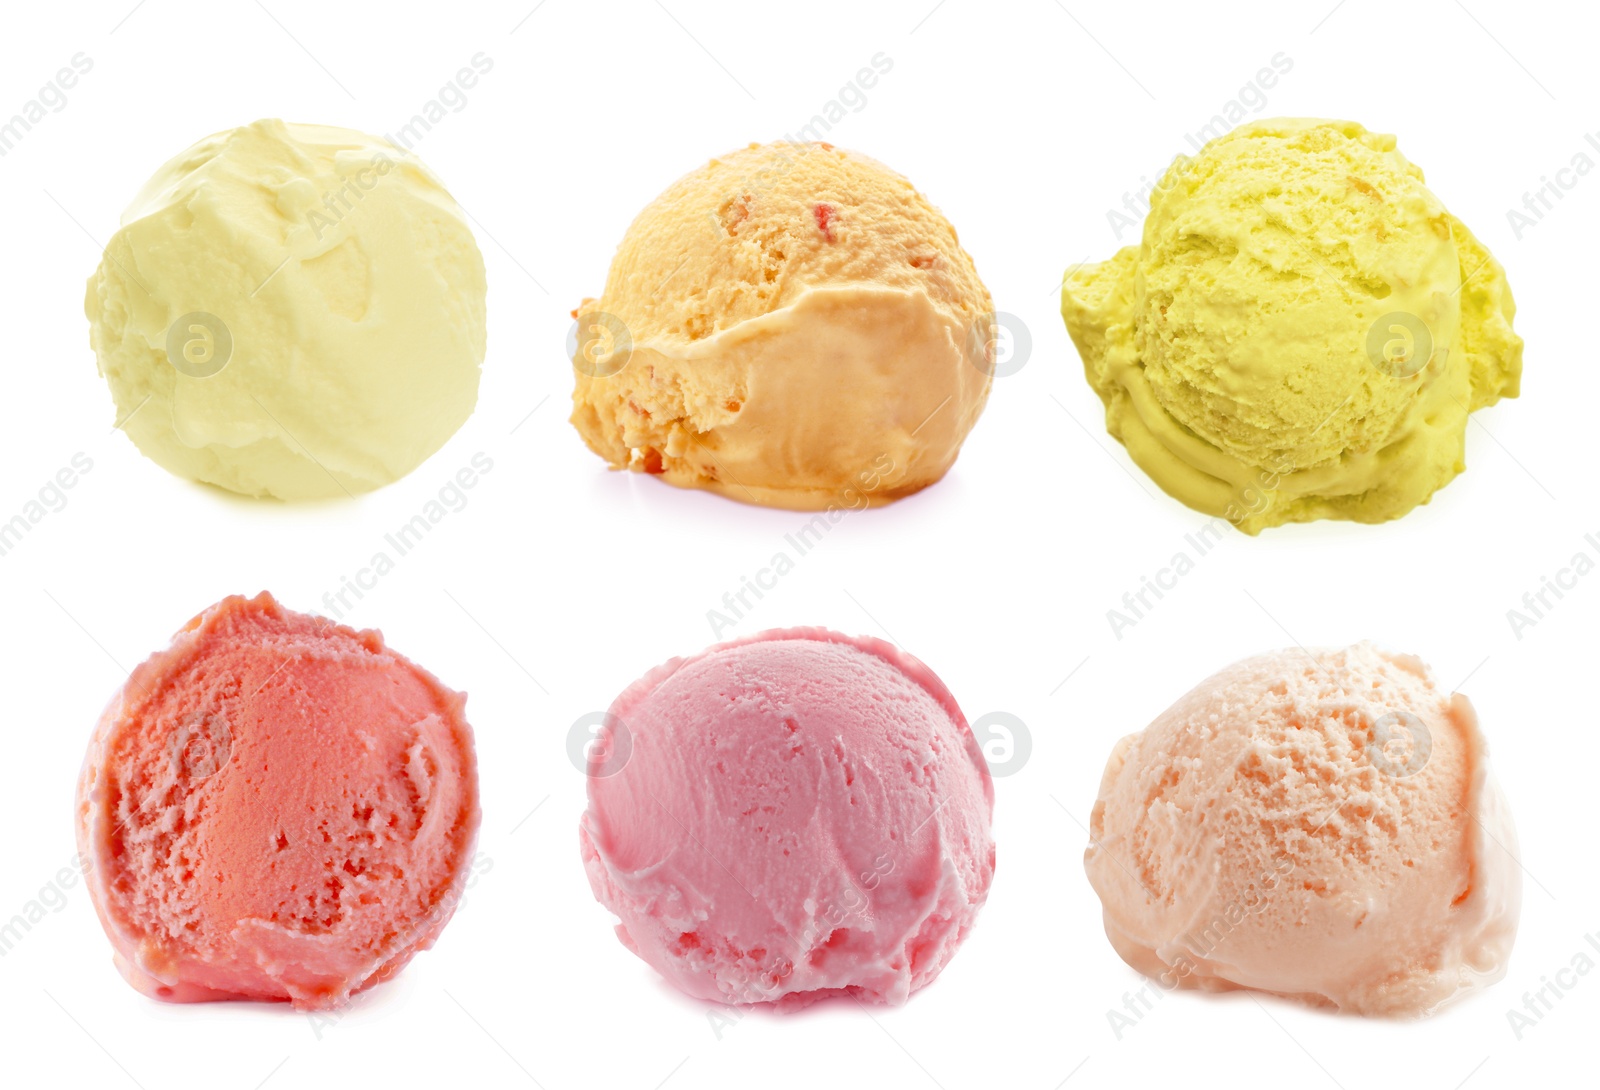 Image of Set with scoops of different ice creams on white background